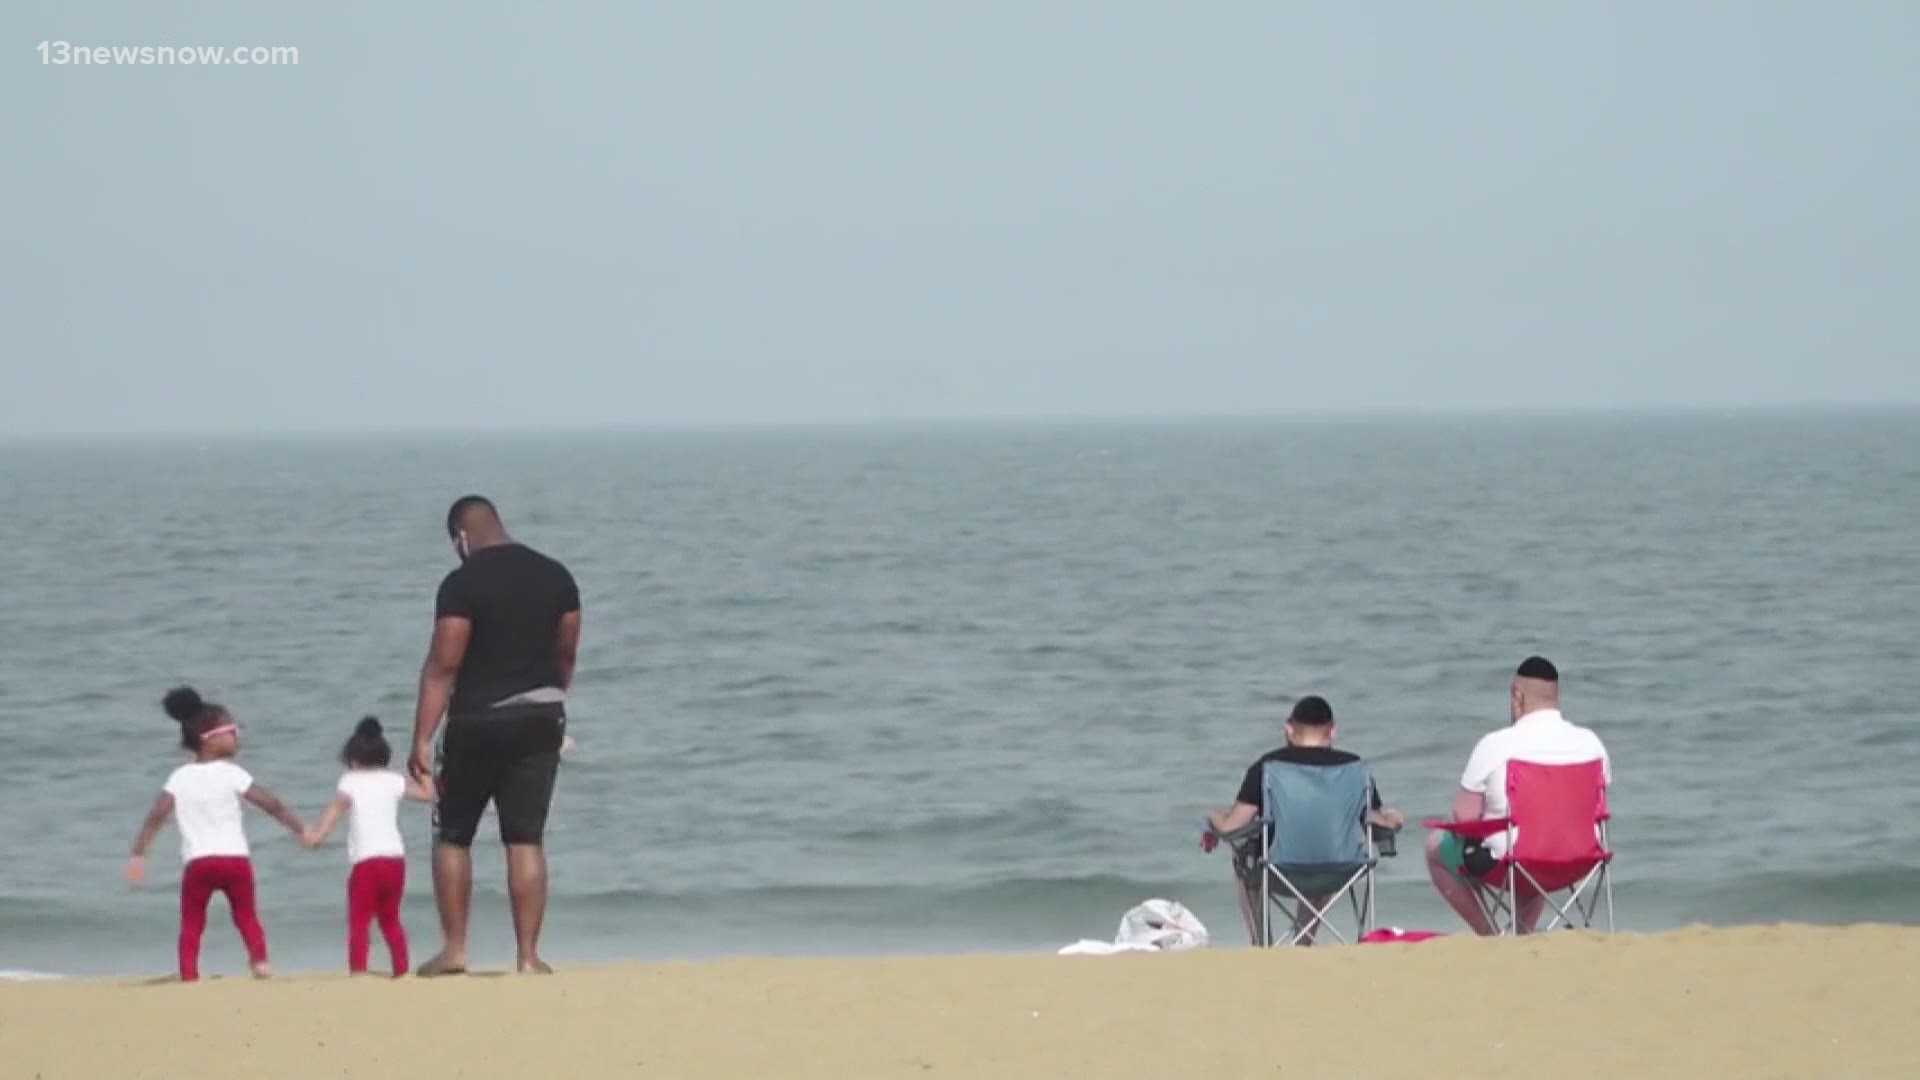 Virginia's COVID-19 restrictions will end just in time for Memorial Day weekend in Virginia Beach.